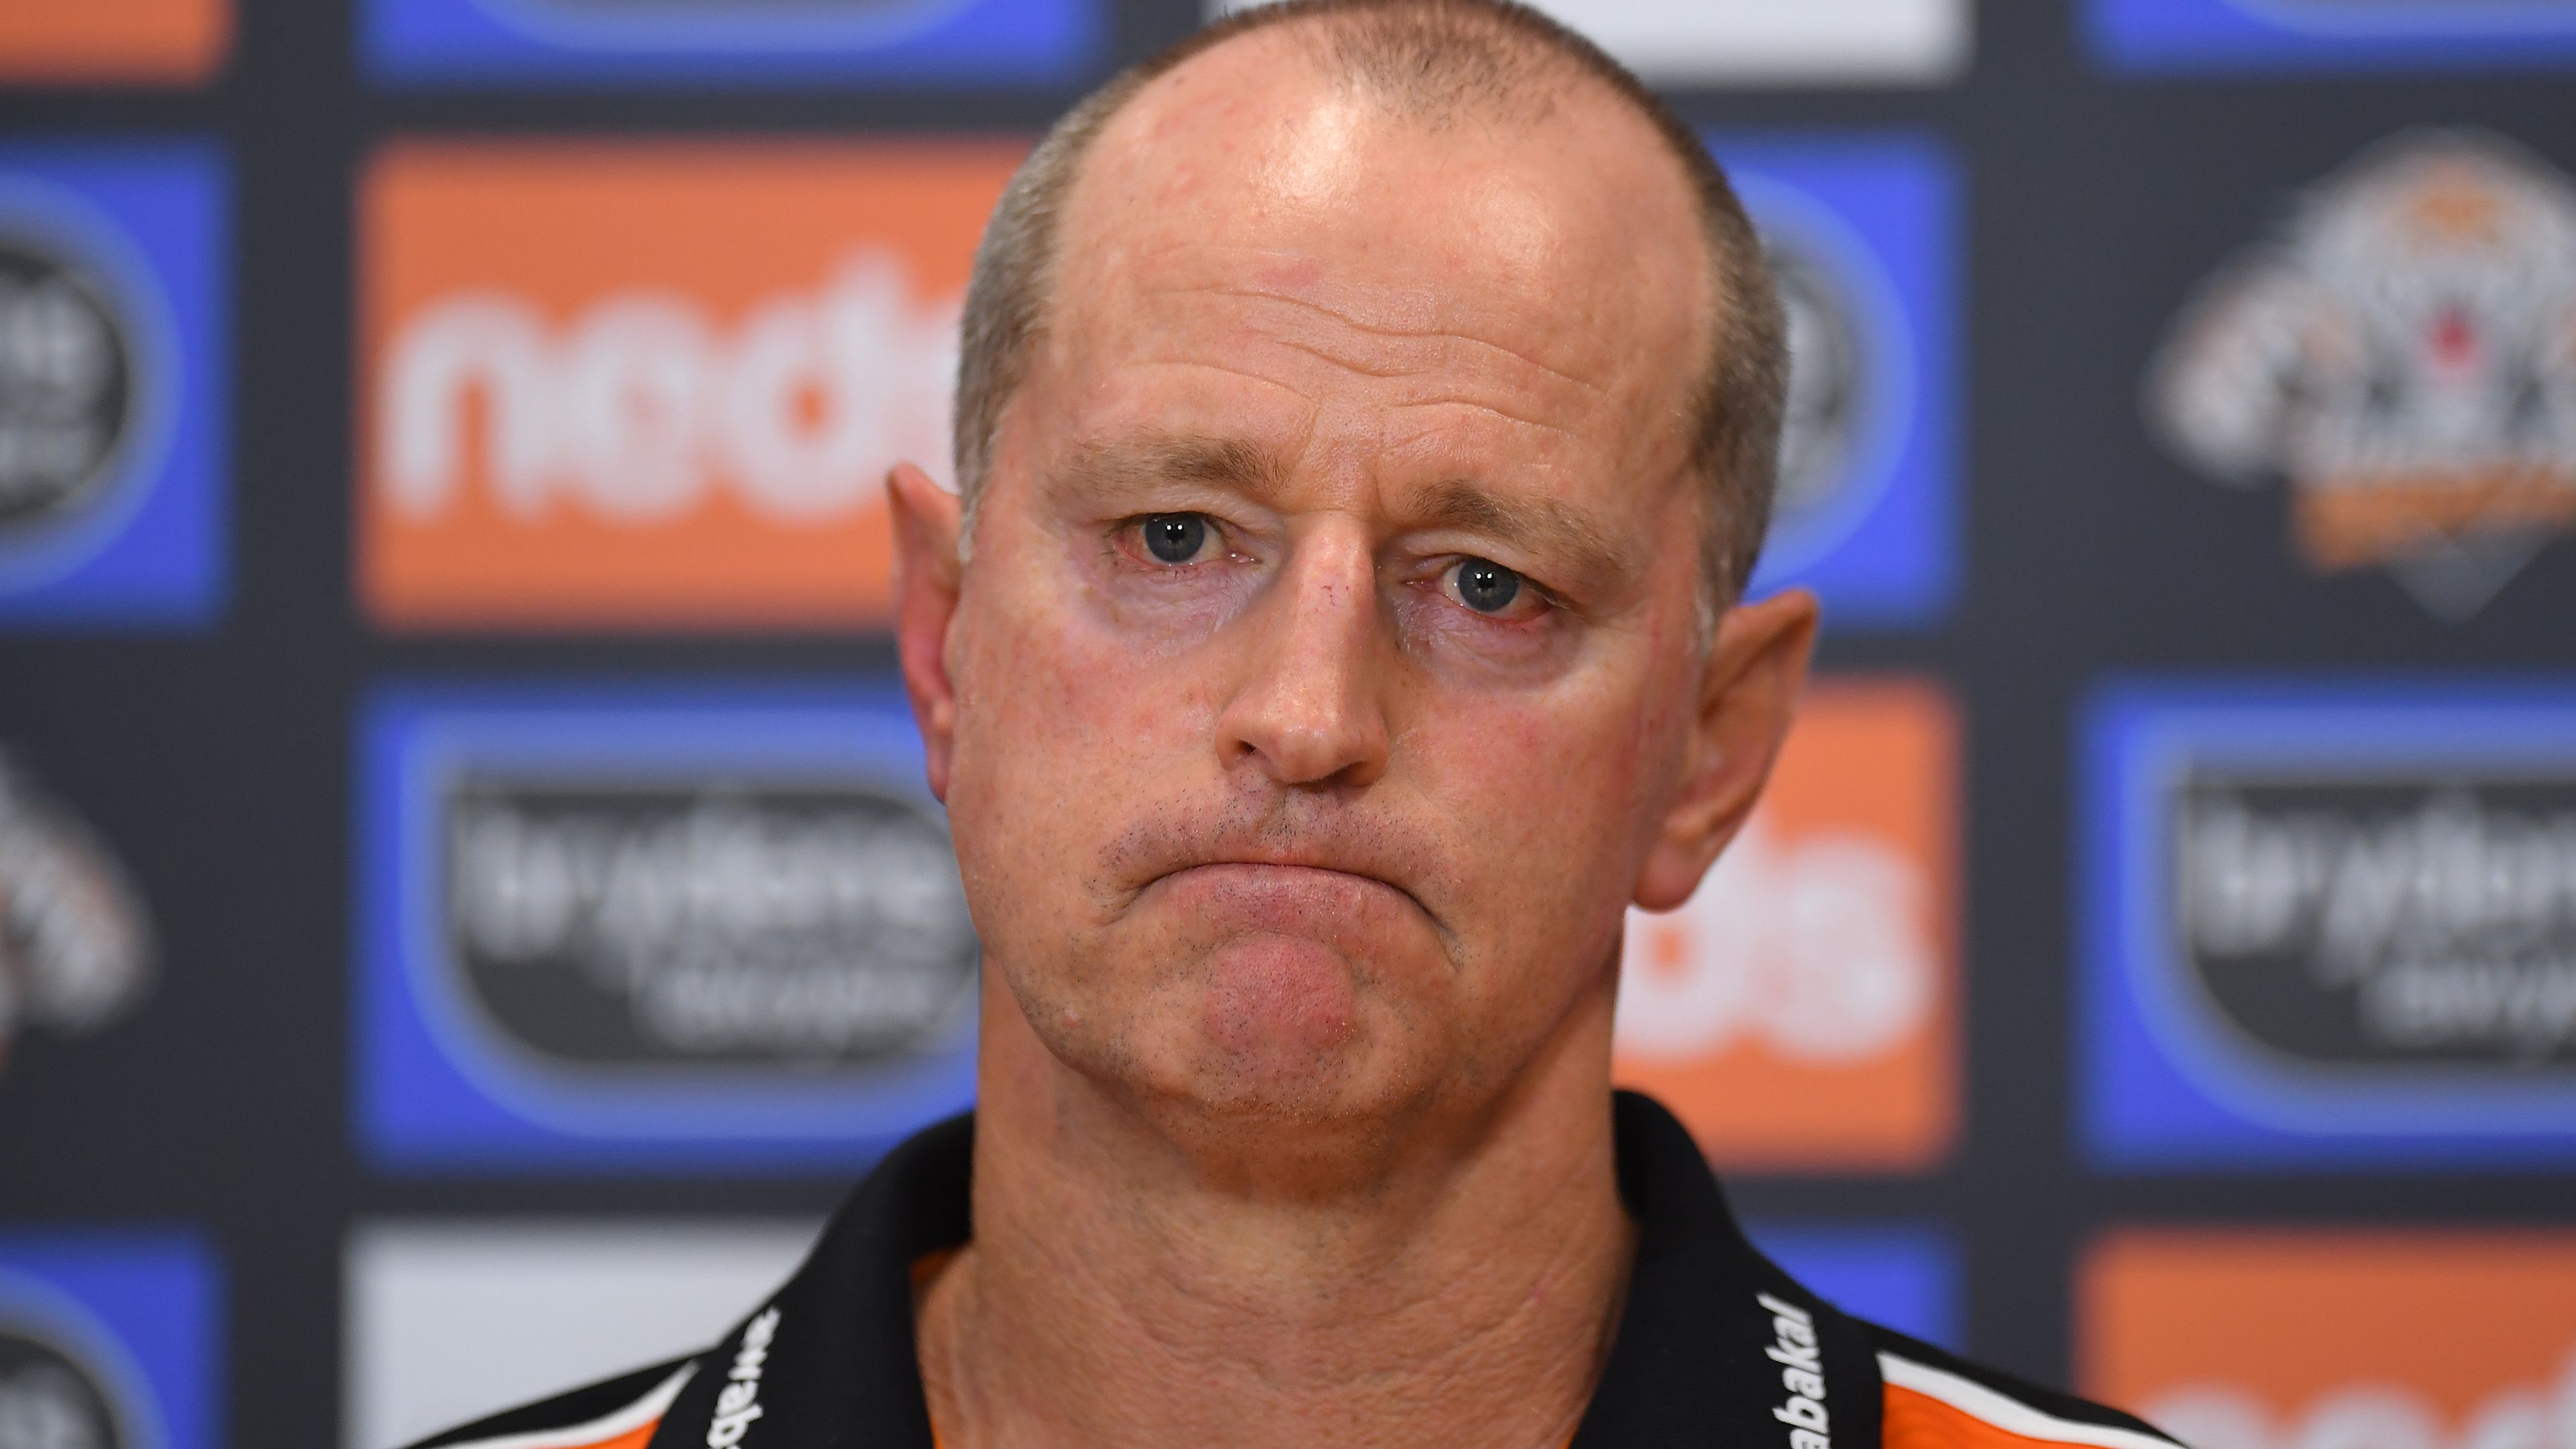 Wests Tigers chairman lifts lid on 'embarrassing' Michael Maguire saga